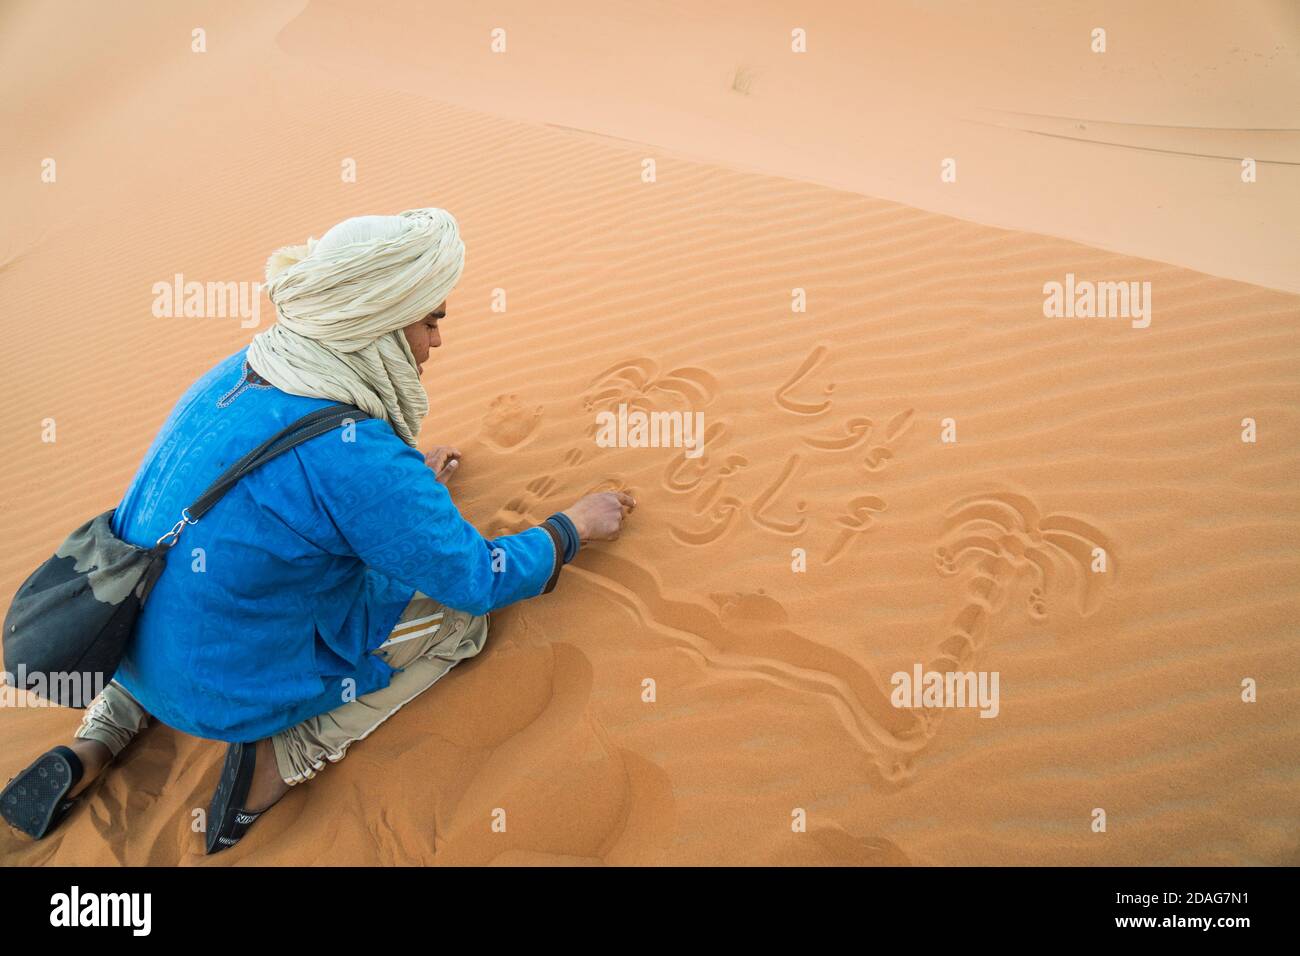 Merzouga, Morocco - APRIL 29 2019: Traditionally blue dressed Moroccan drawing in the sand of the Sahara Desert Stock Photo